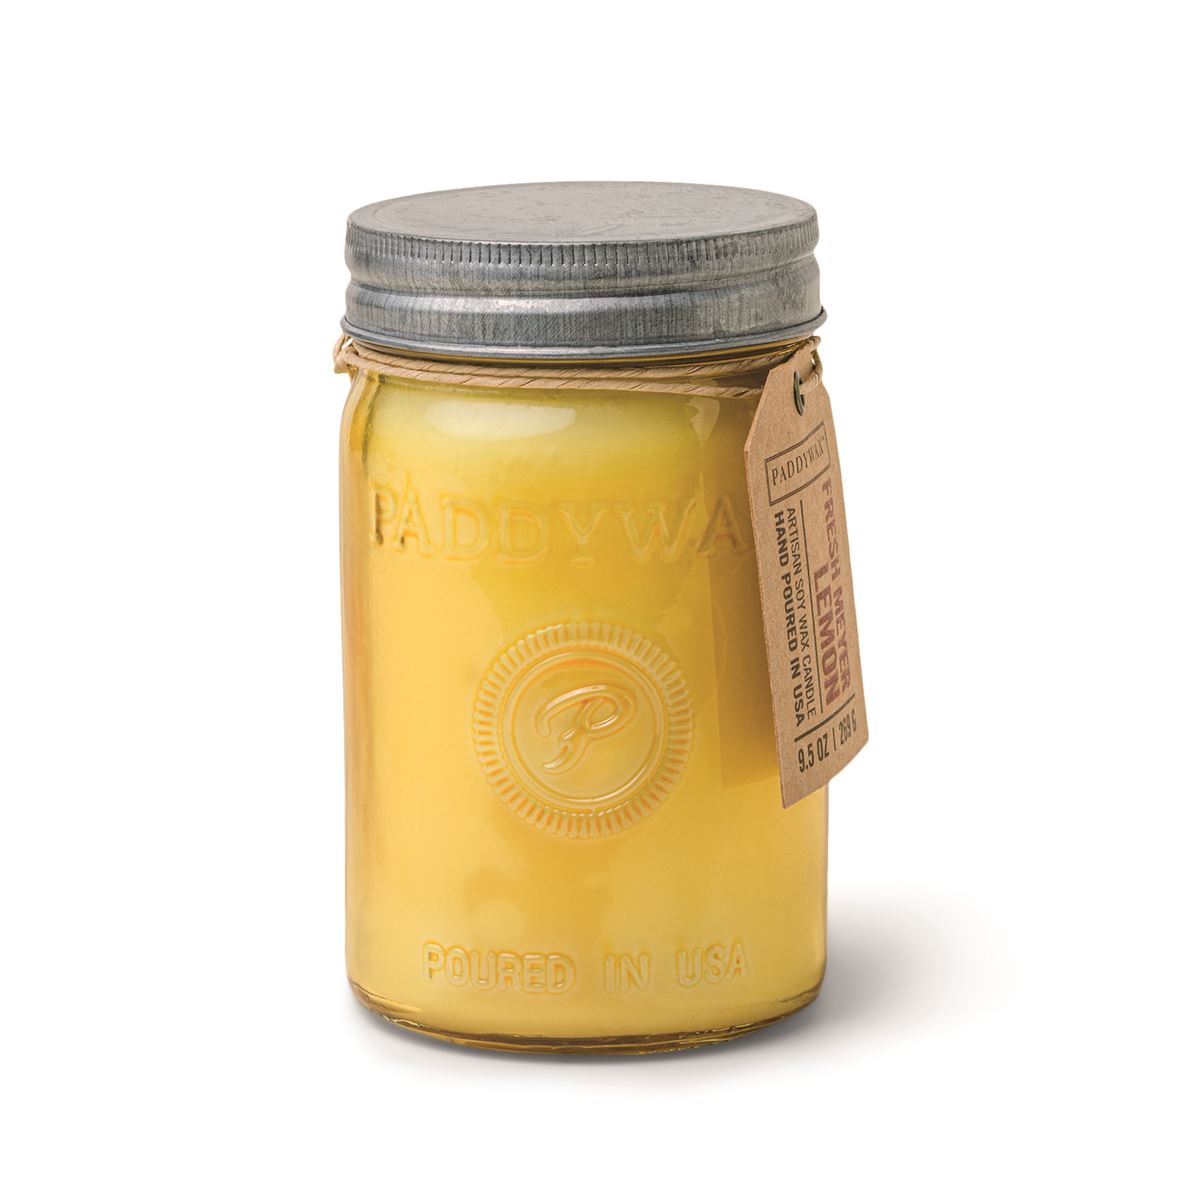 HANDCRAFTED SOY WAX CANDLES IN LEMON SUGAR COOKIE – Love Marlow